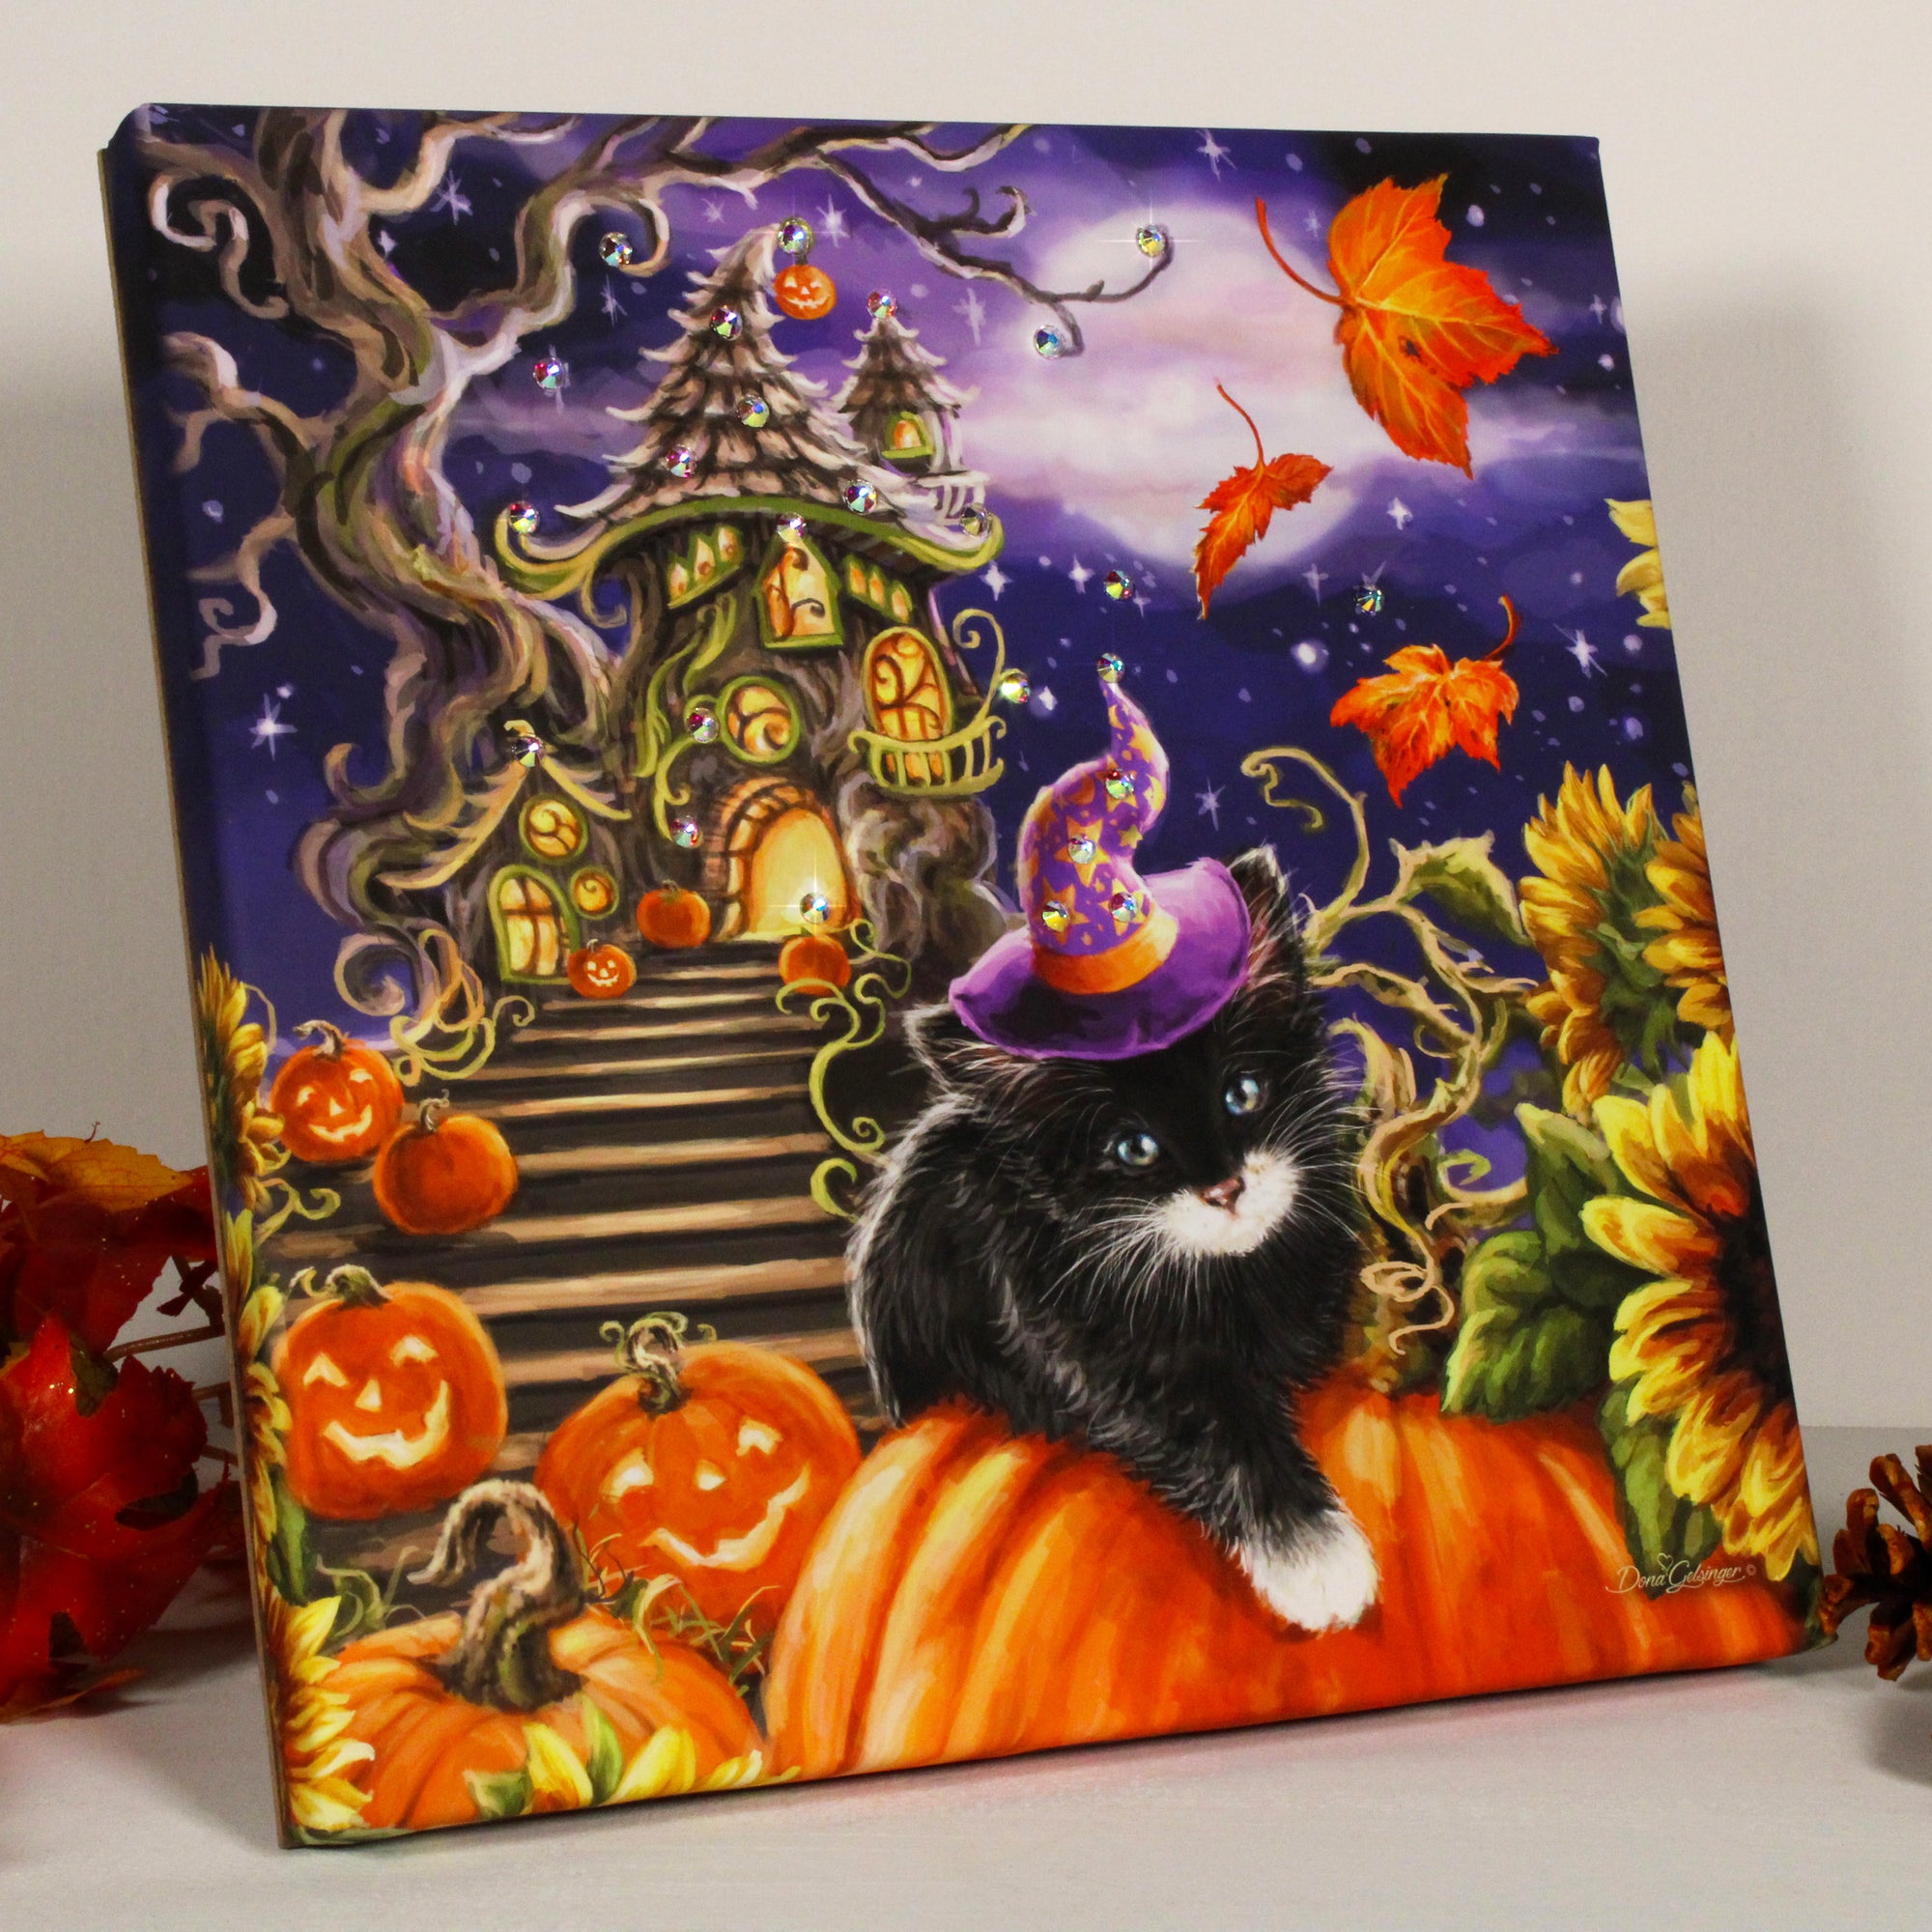 This delightful artwork features a mischievous kitten sporting a witch's hat as she lounges atop a grinning jack-o-lantern surrounded by vibrant sunflowers and more jack-o-lanterns. And to add even more sparkle and shine to this whimsical piece, it's adorned with dazzling crystals that catch the light and add a touch of elegance.